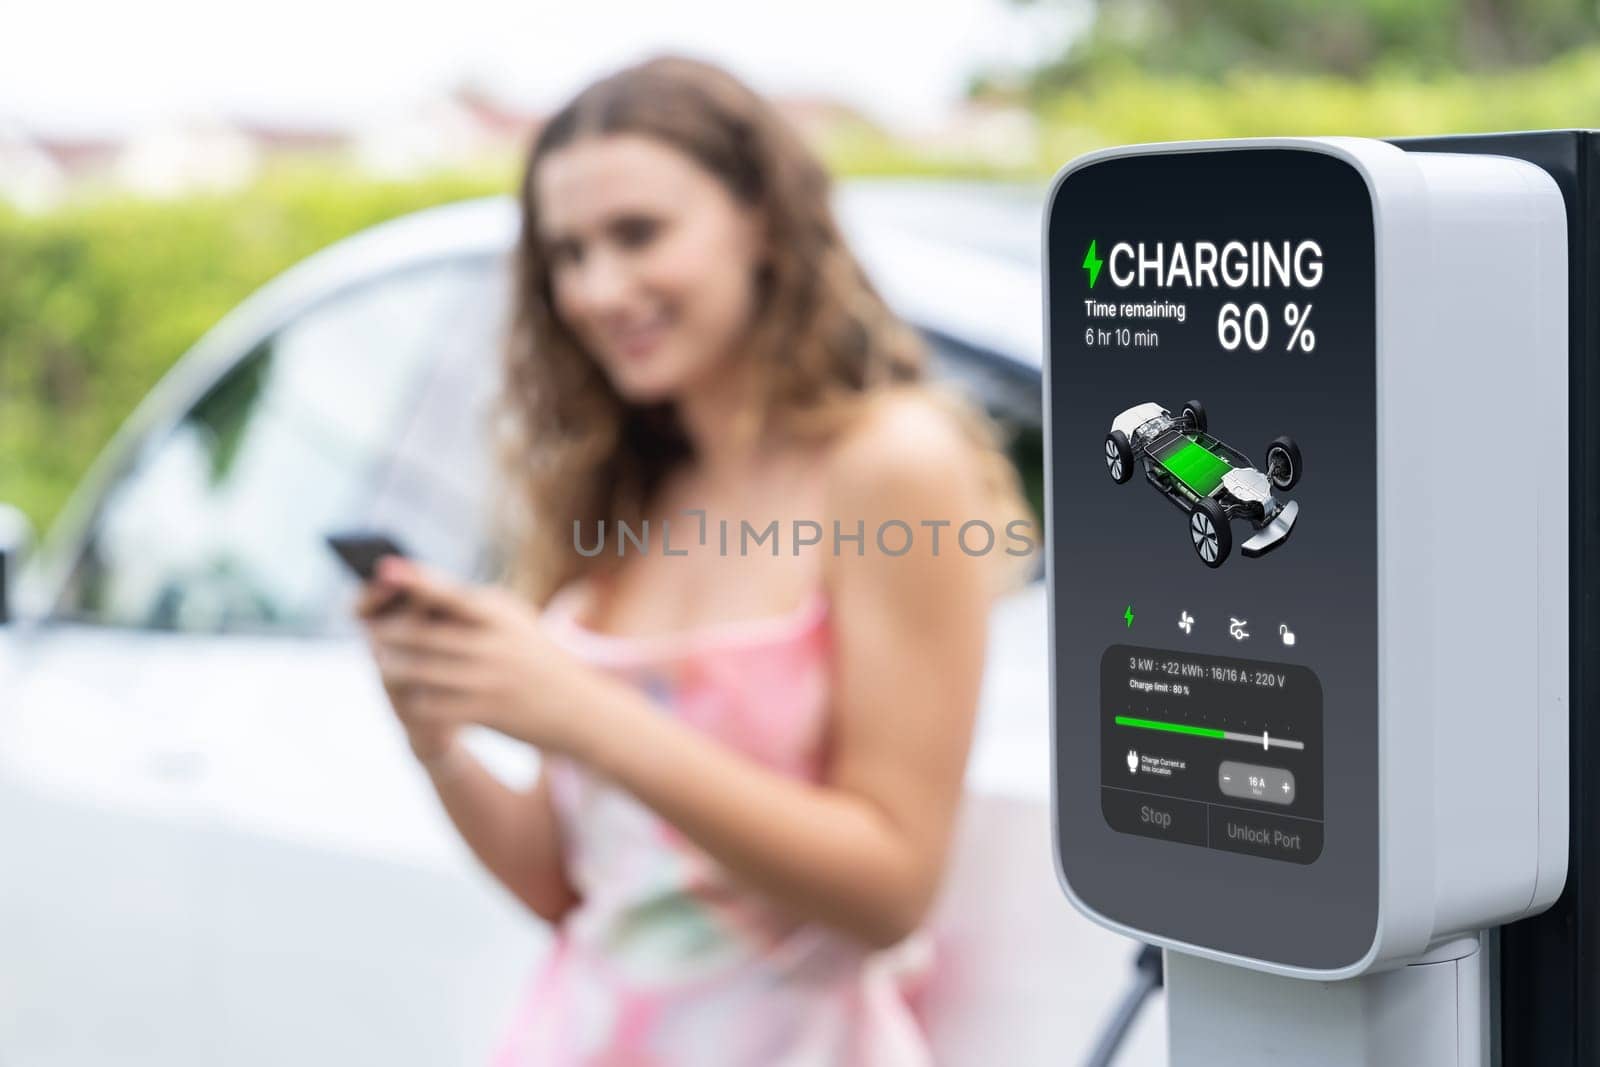 Focused outdoor charging station display EV car's battery status. Synchronos by biancoblue